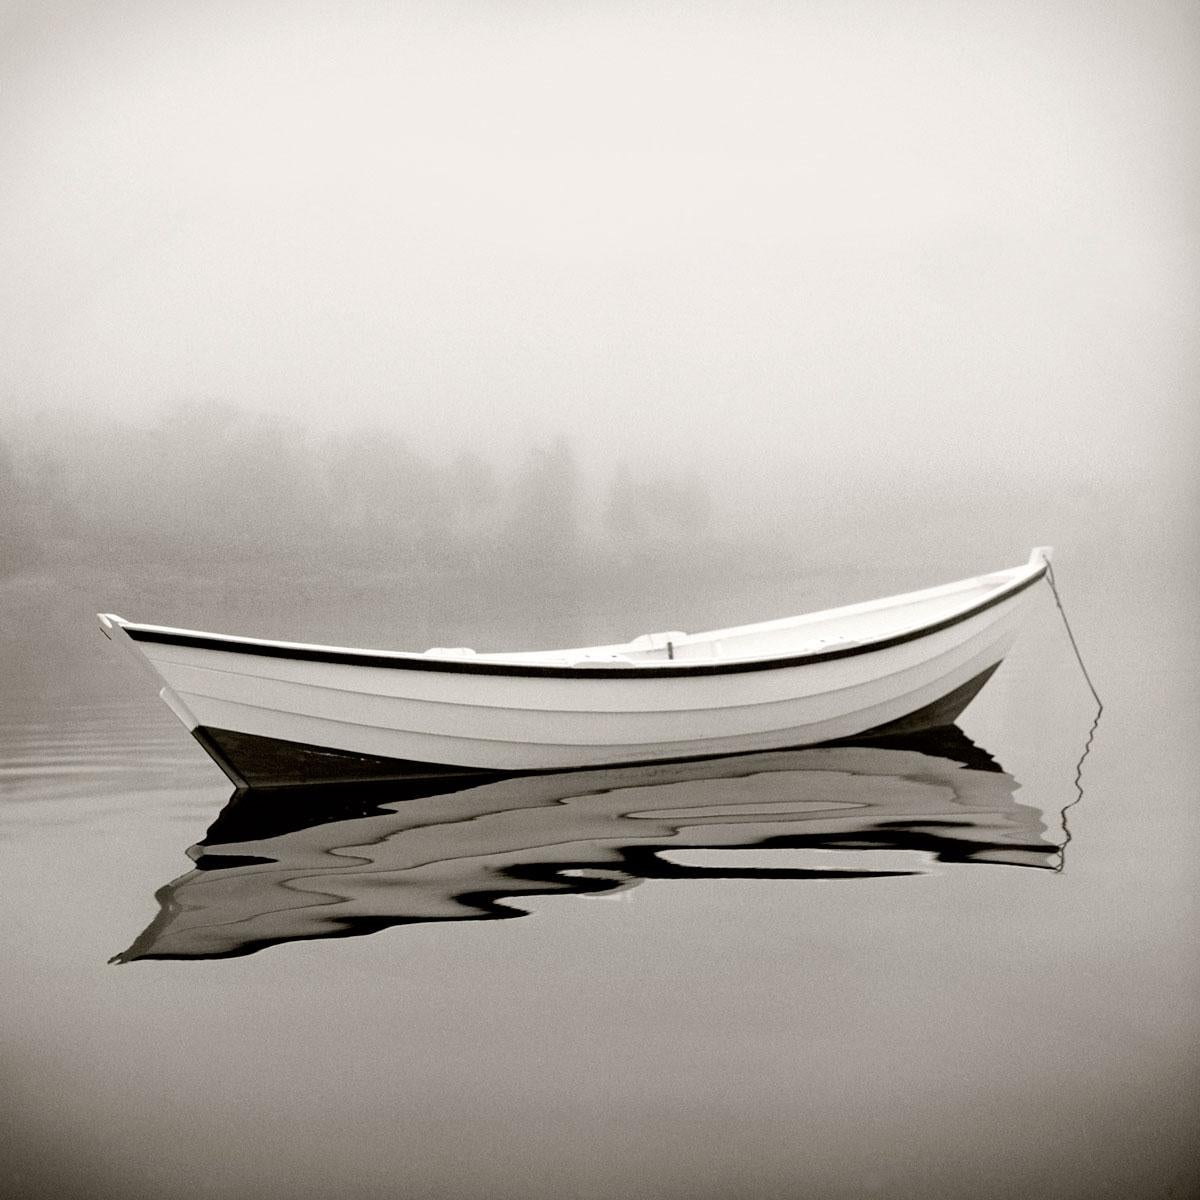 Michael KAHN
Wild Rose
Silver gelatin photograph
Hand signed and numbered
Limited edition of 10
14 x 14 inches

MICHAEL KAHN
(b. 1960, United States)

Michael Kahn’s stunning seascape and spectacular sailing photographs are exhibited in art